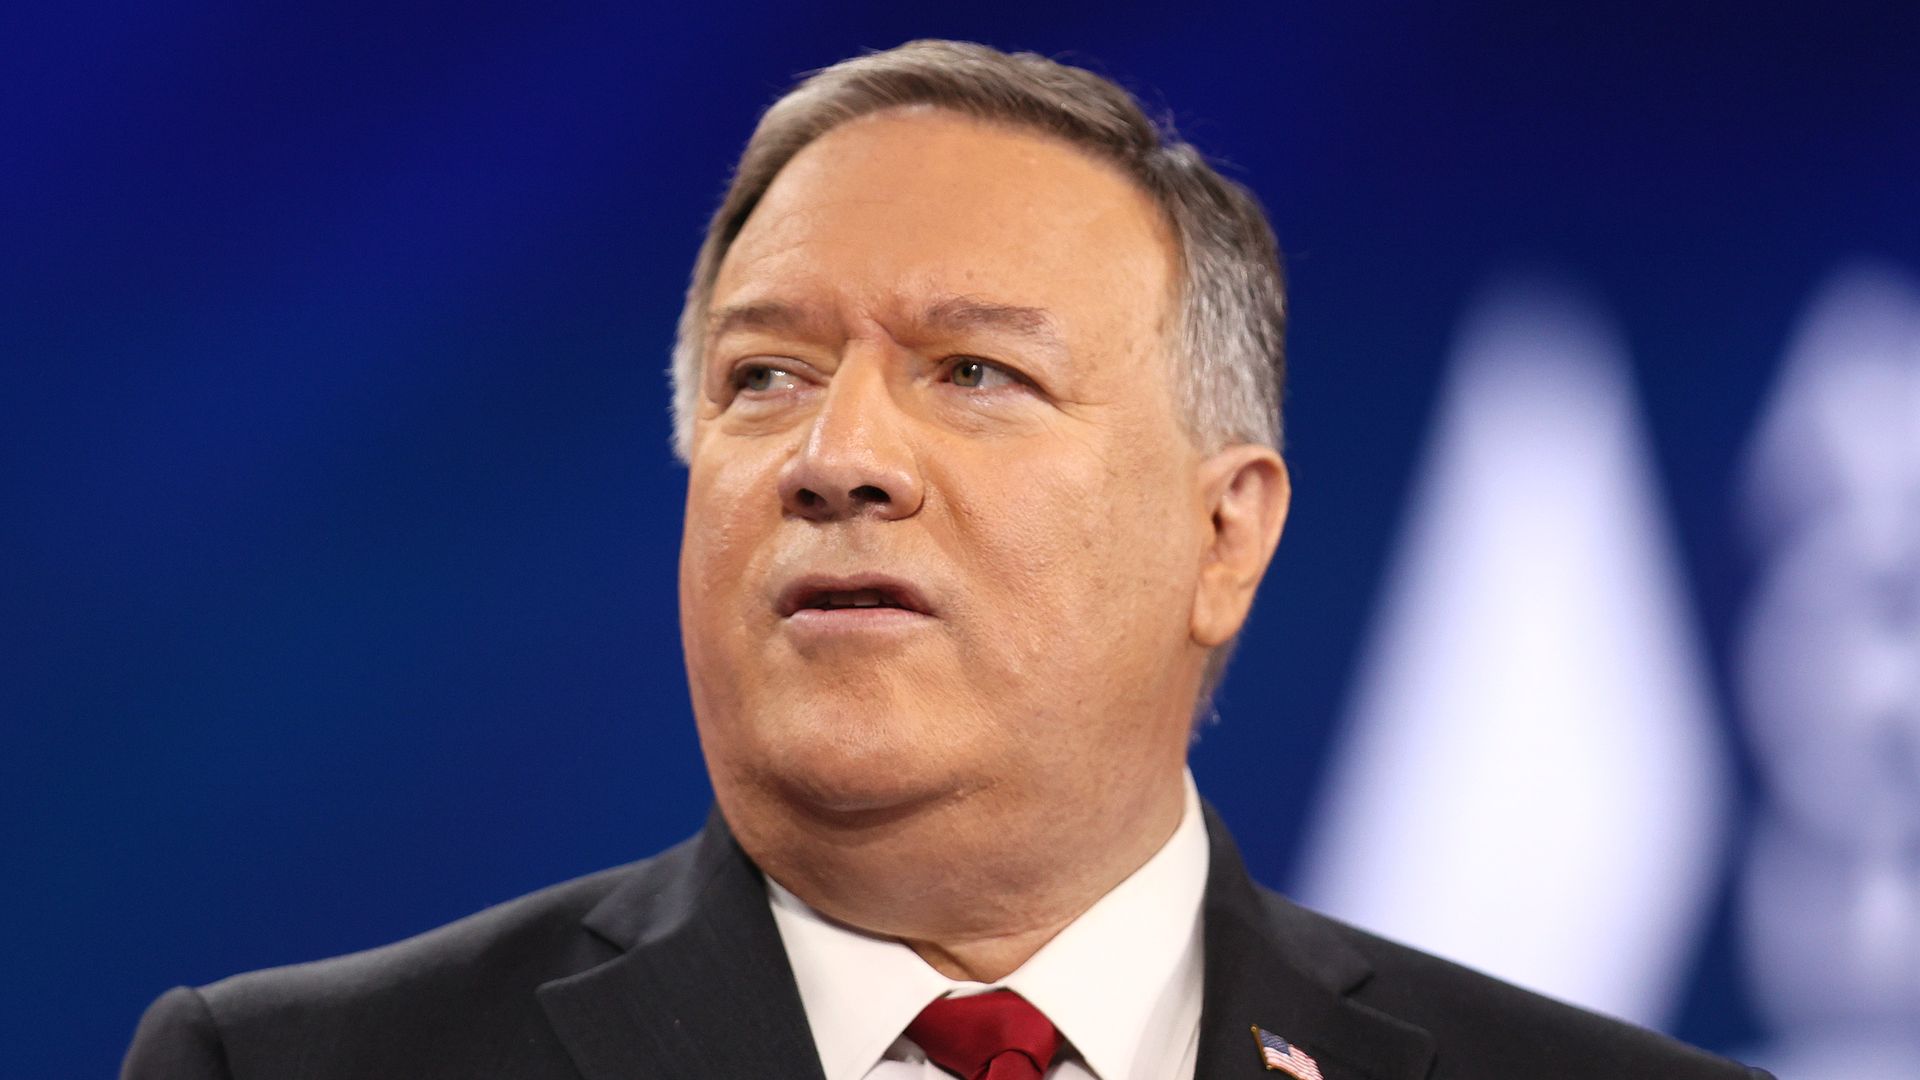 Pompeo, wife misused State Dept. resources, federal watchdog finds